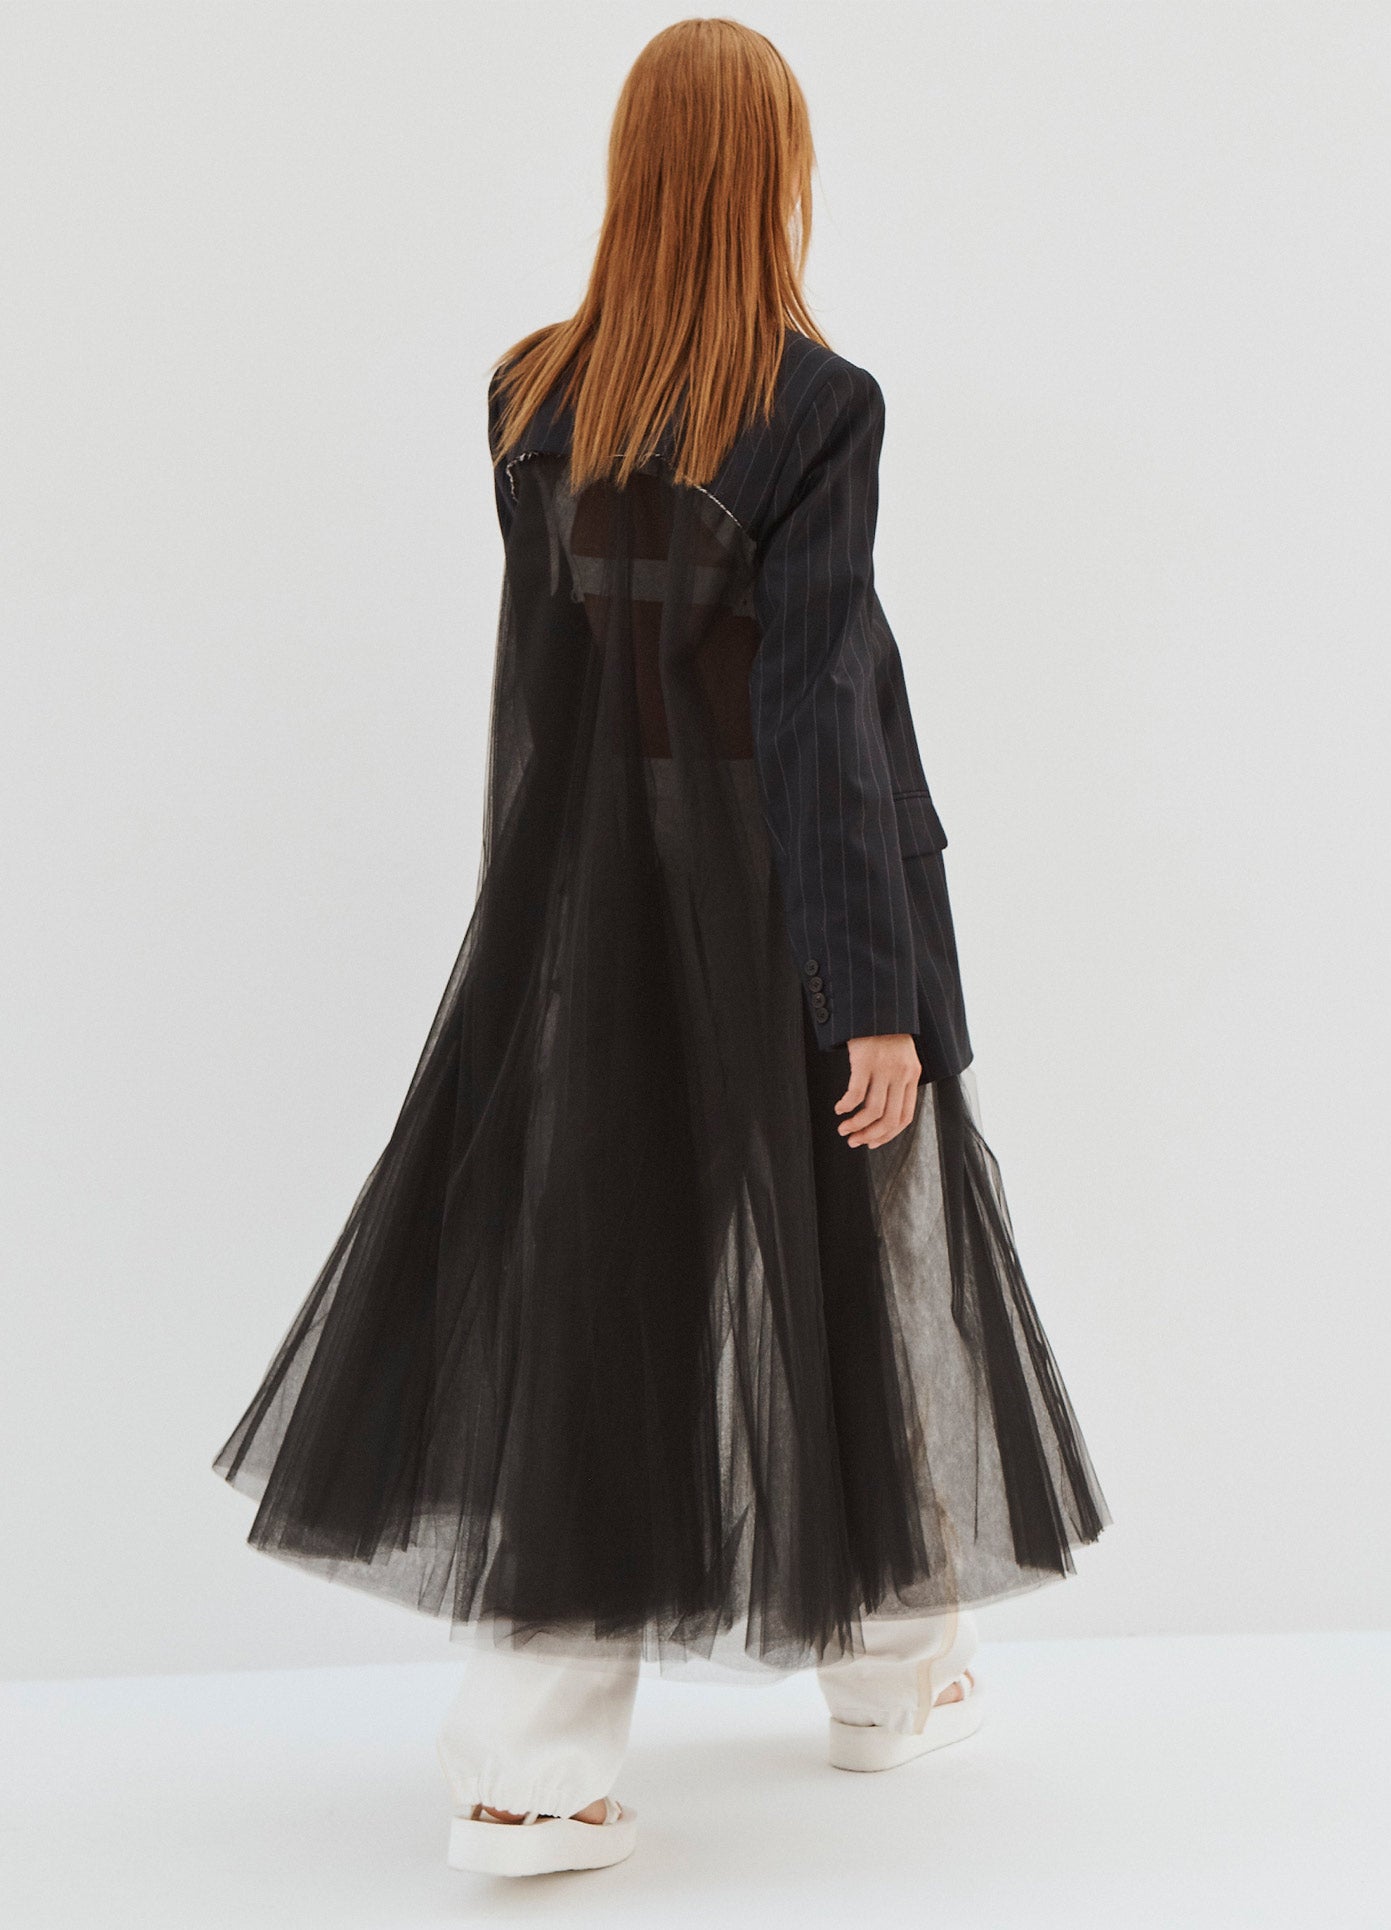 MONSE Blazer with Tulle in Black and Midnight on Model Walking Away Back View